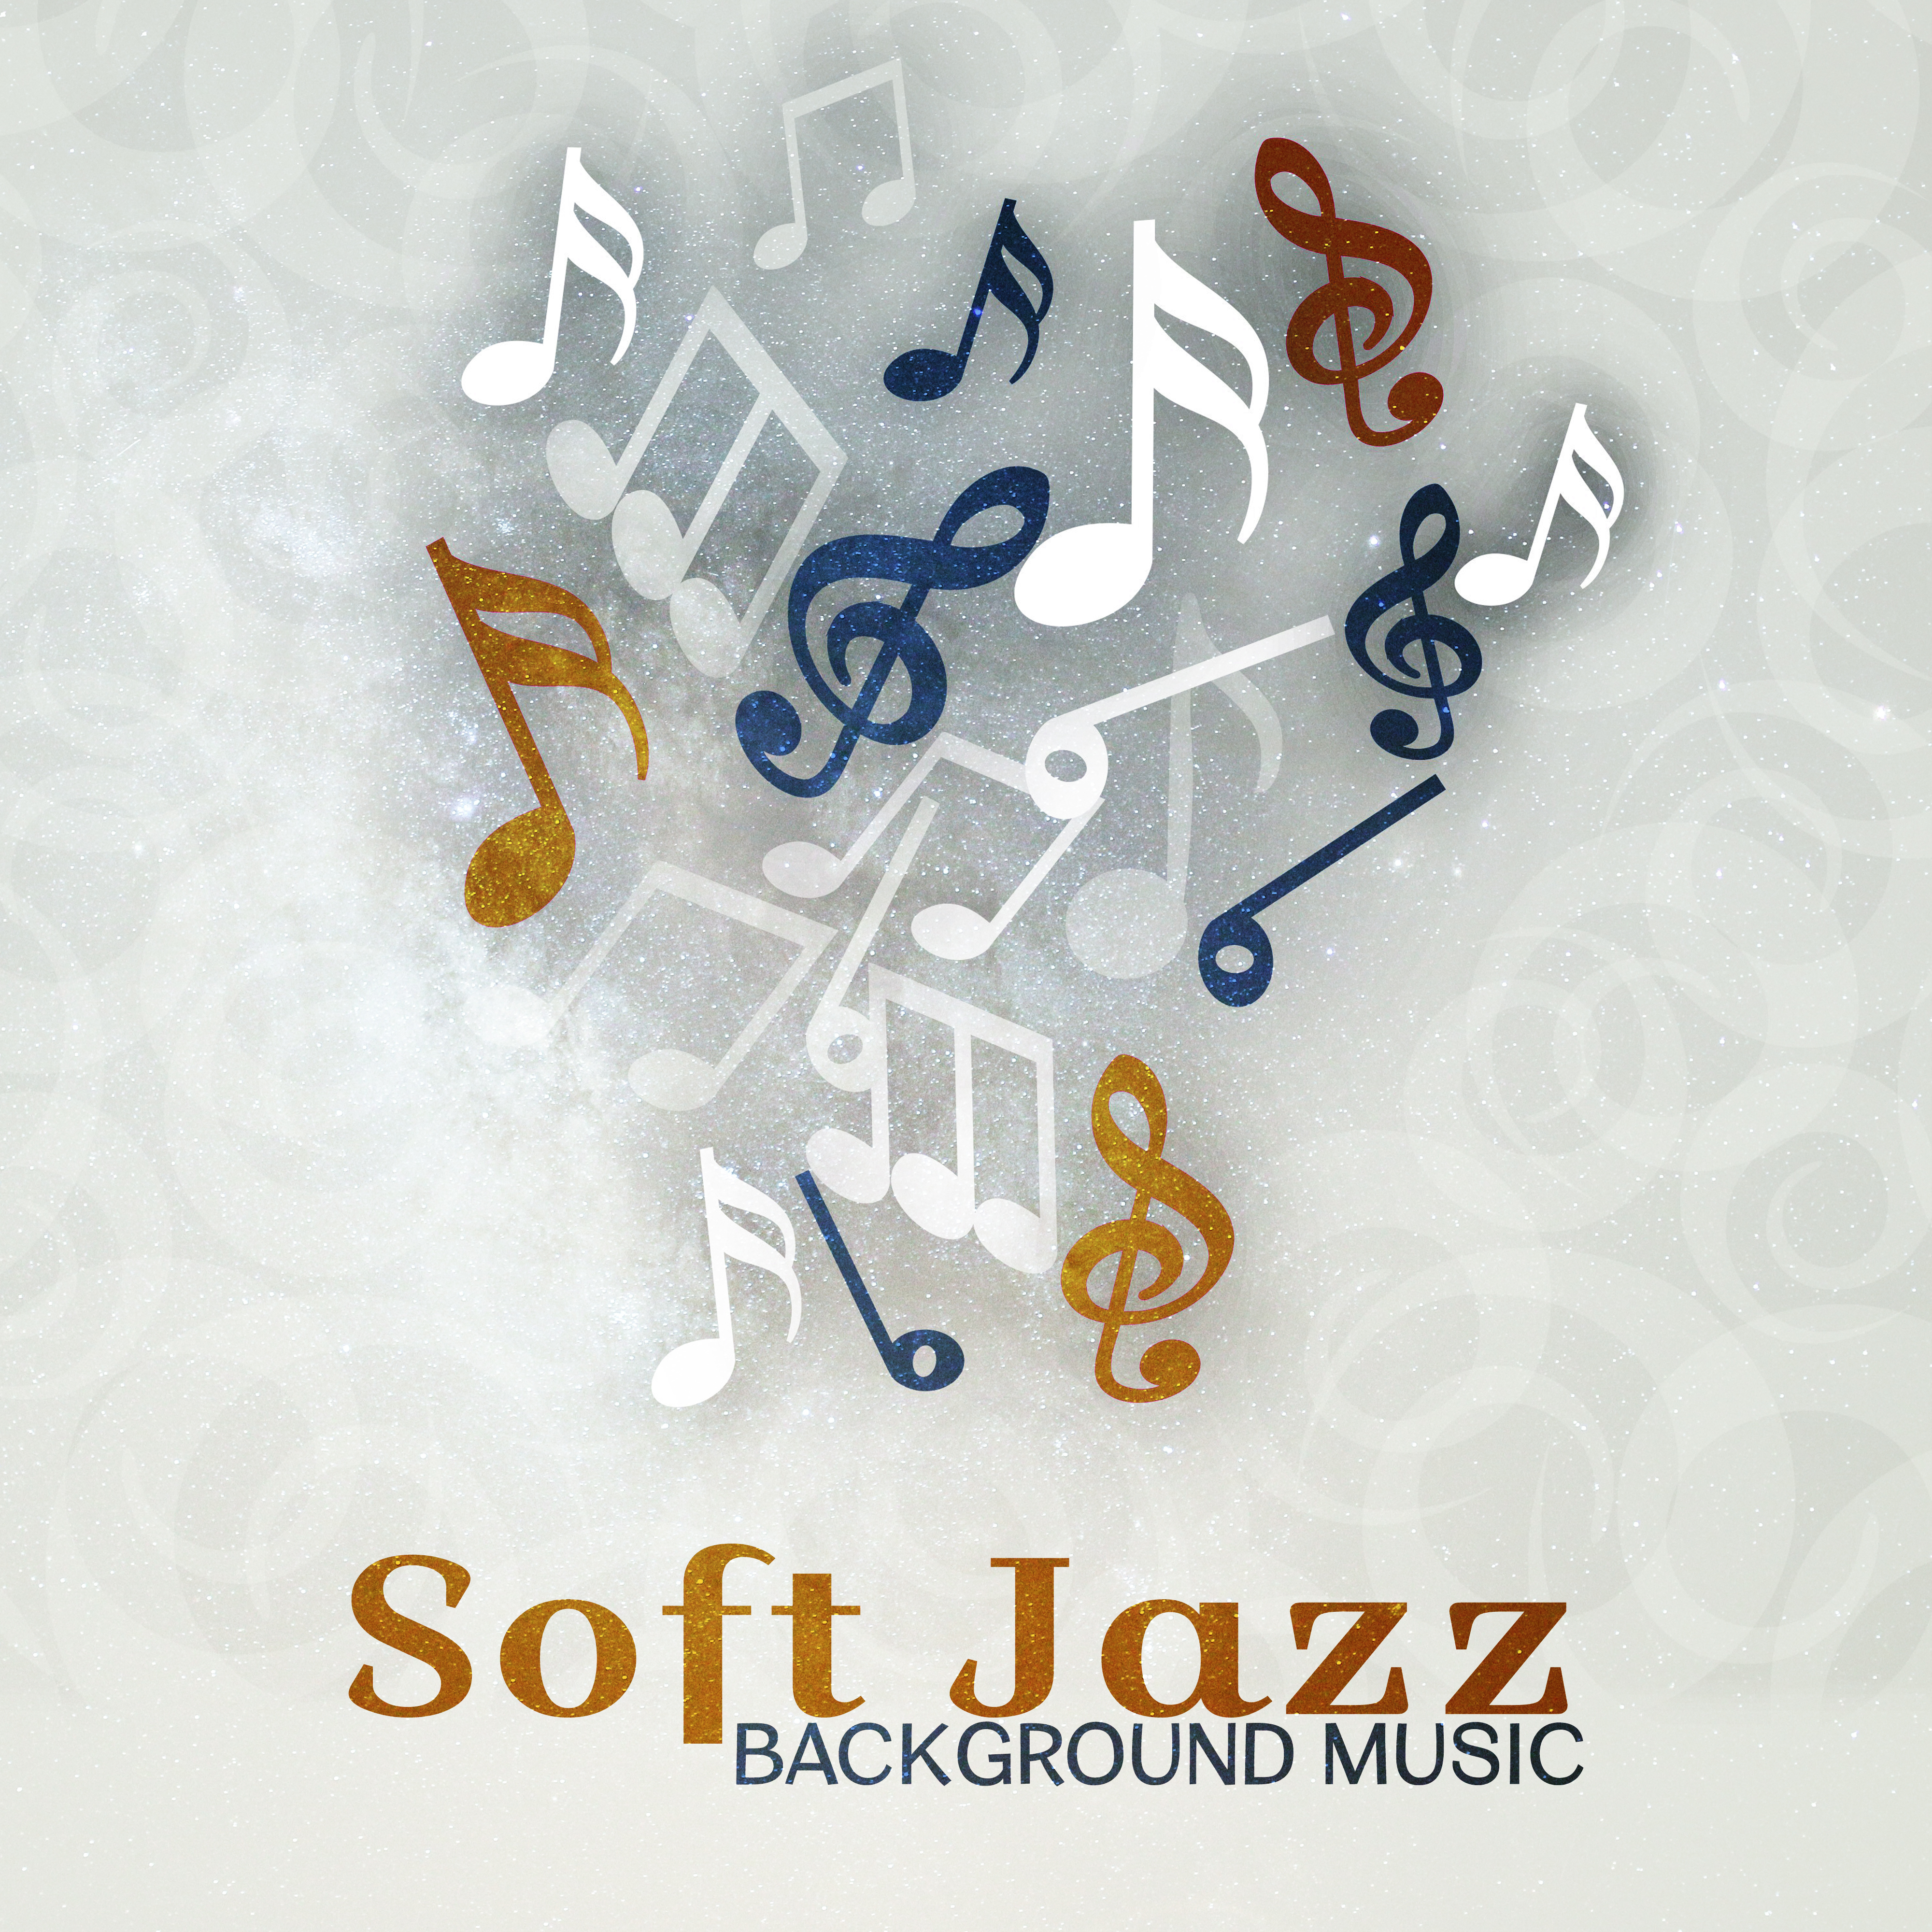 Soft Jazz Background Music  Soft Sounds to Relax, Easy Listening, Peaceful Music, Melodies to Rest